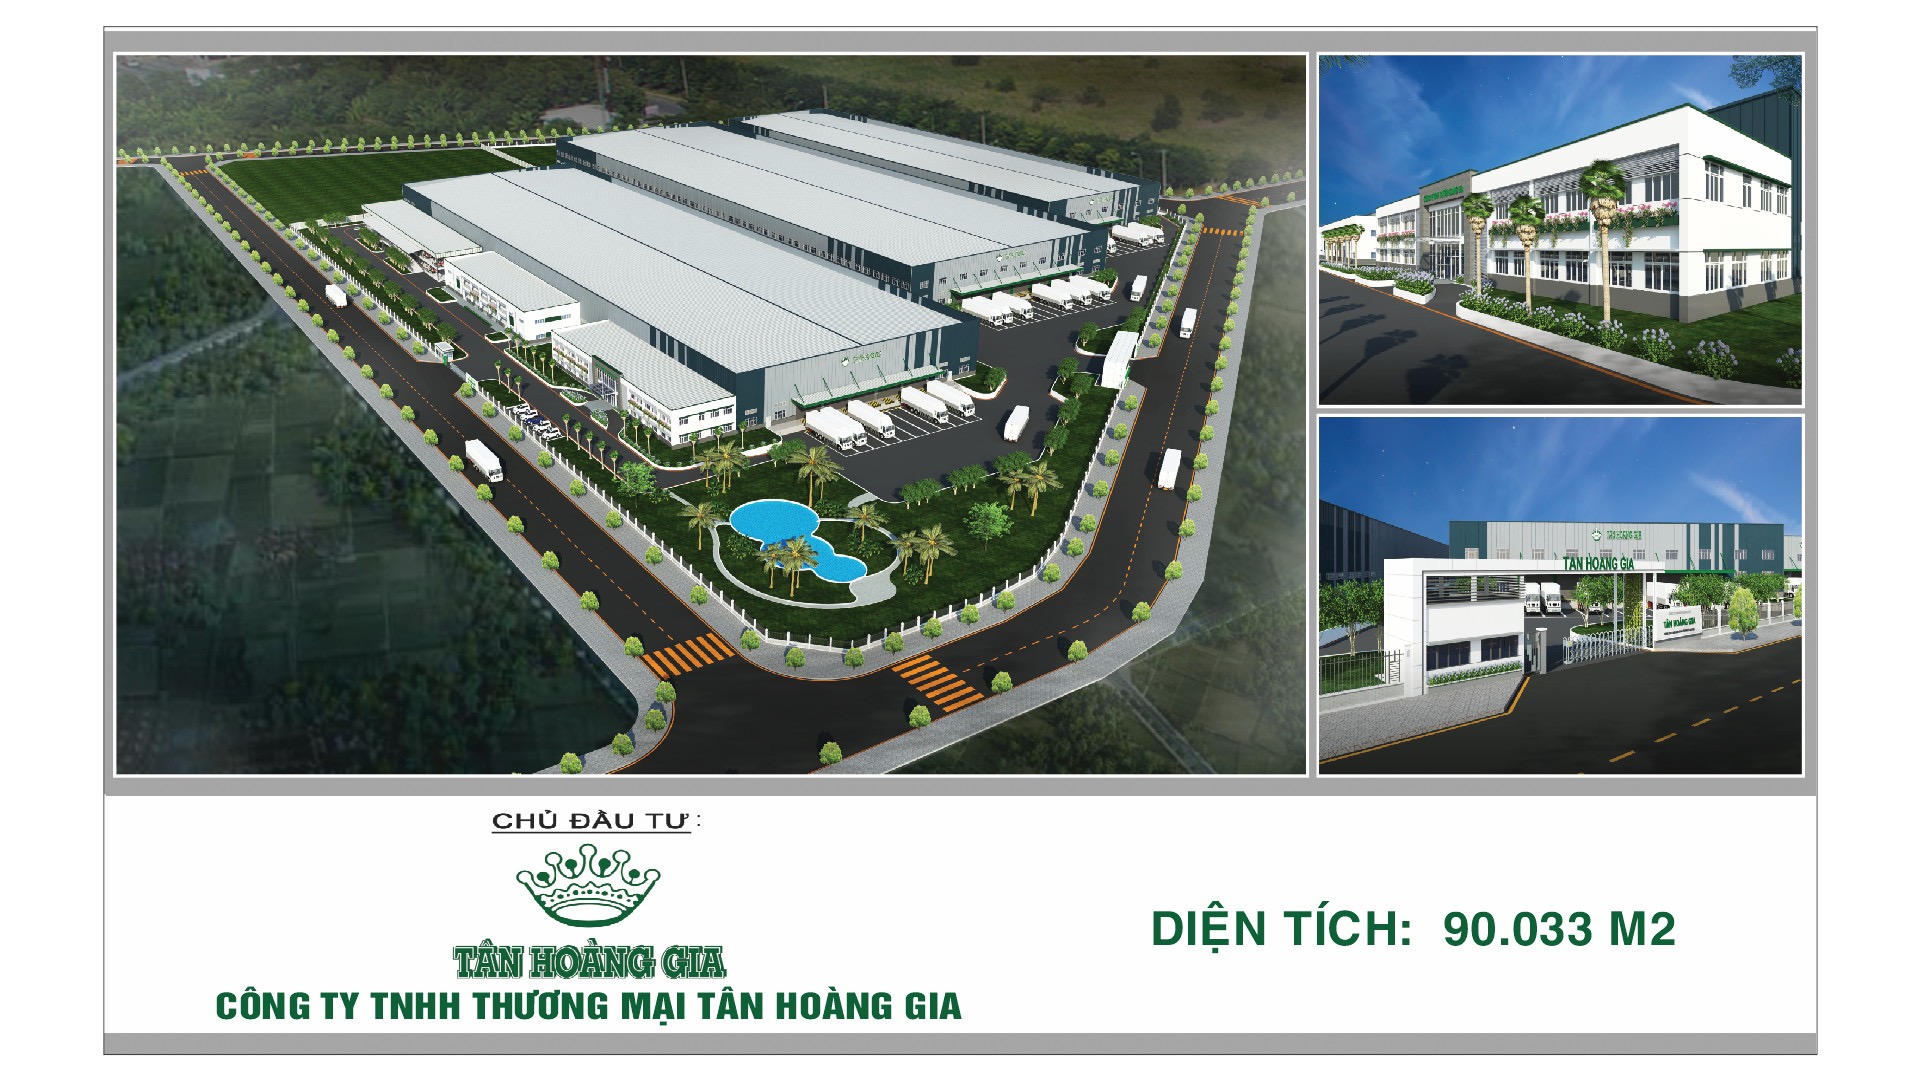 GROUNDBREAKING CEREMONY FOR TAN HOANG GIA NEW FACTORY